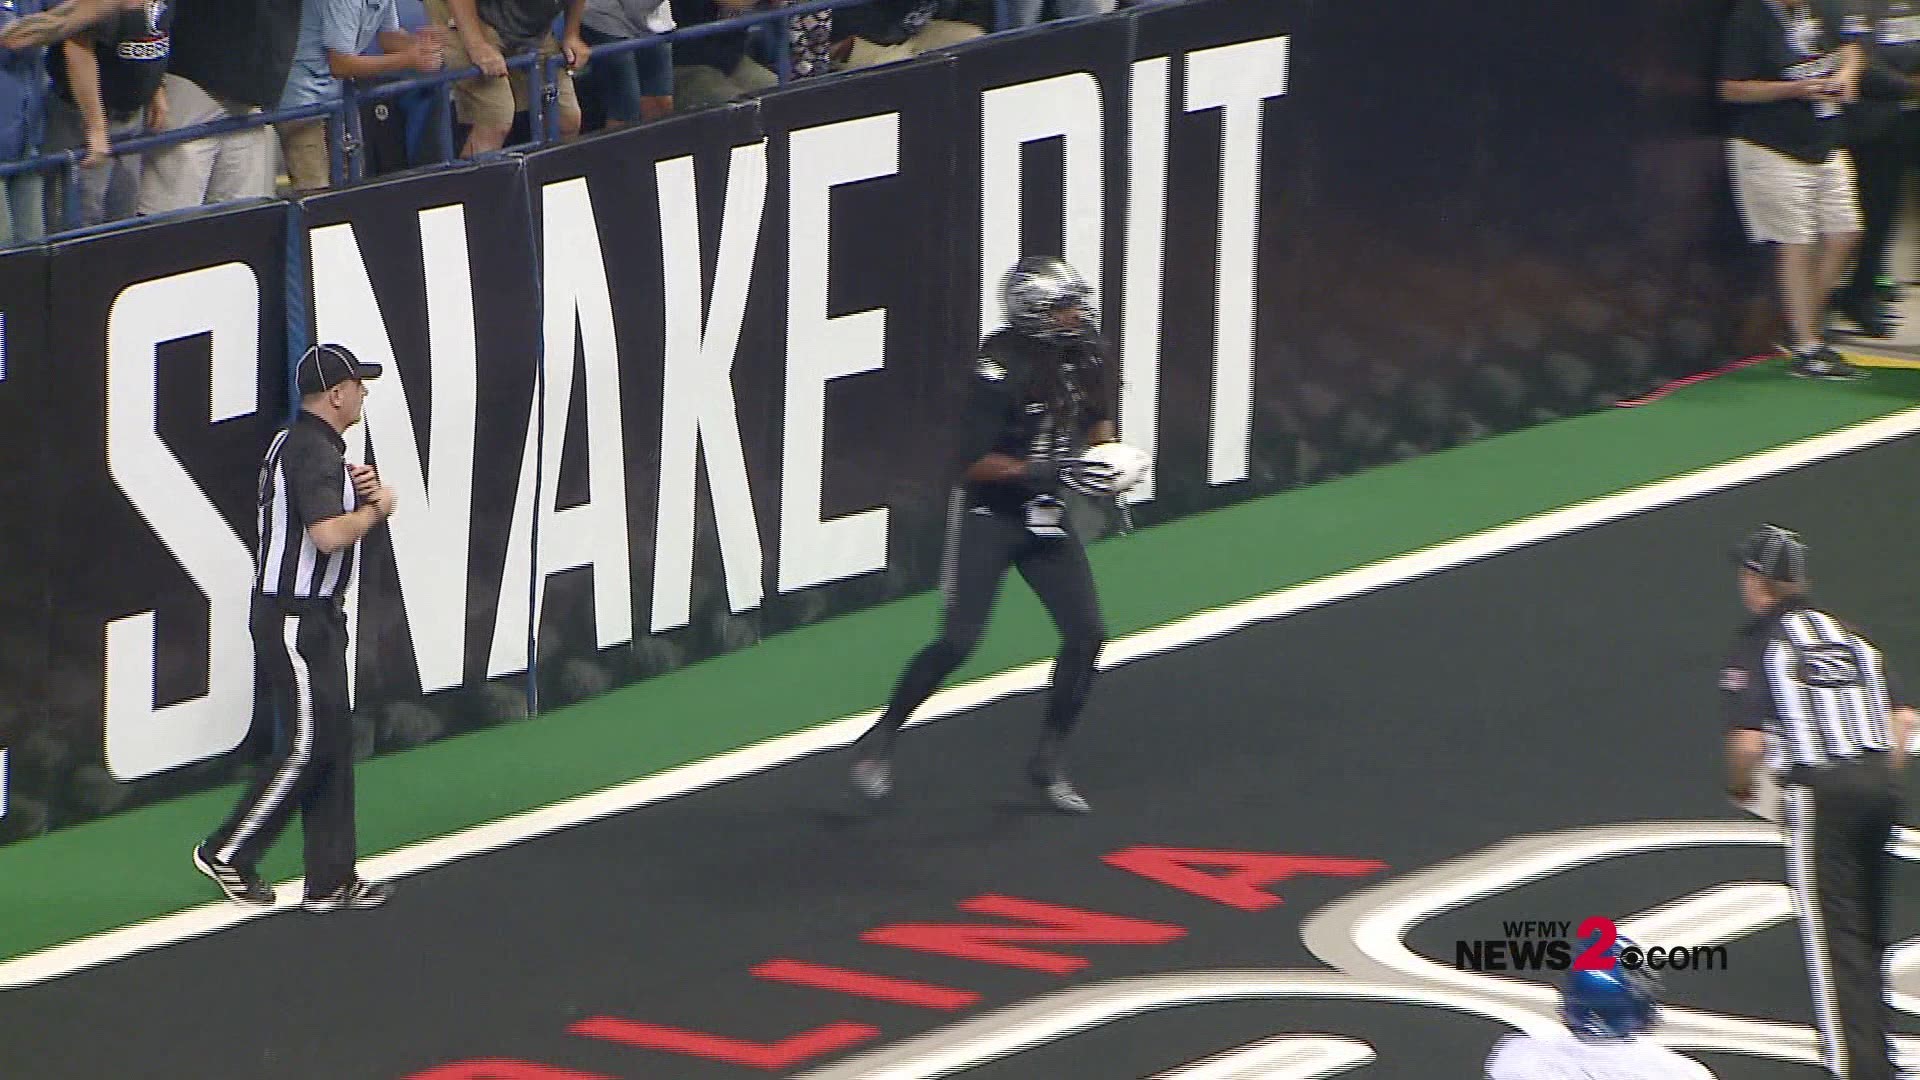 The Carolina Cobras are the 2018 National Arena League champions after defeating the Columbus Lions 66-8 at the Greensboro Coliseum.